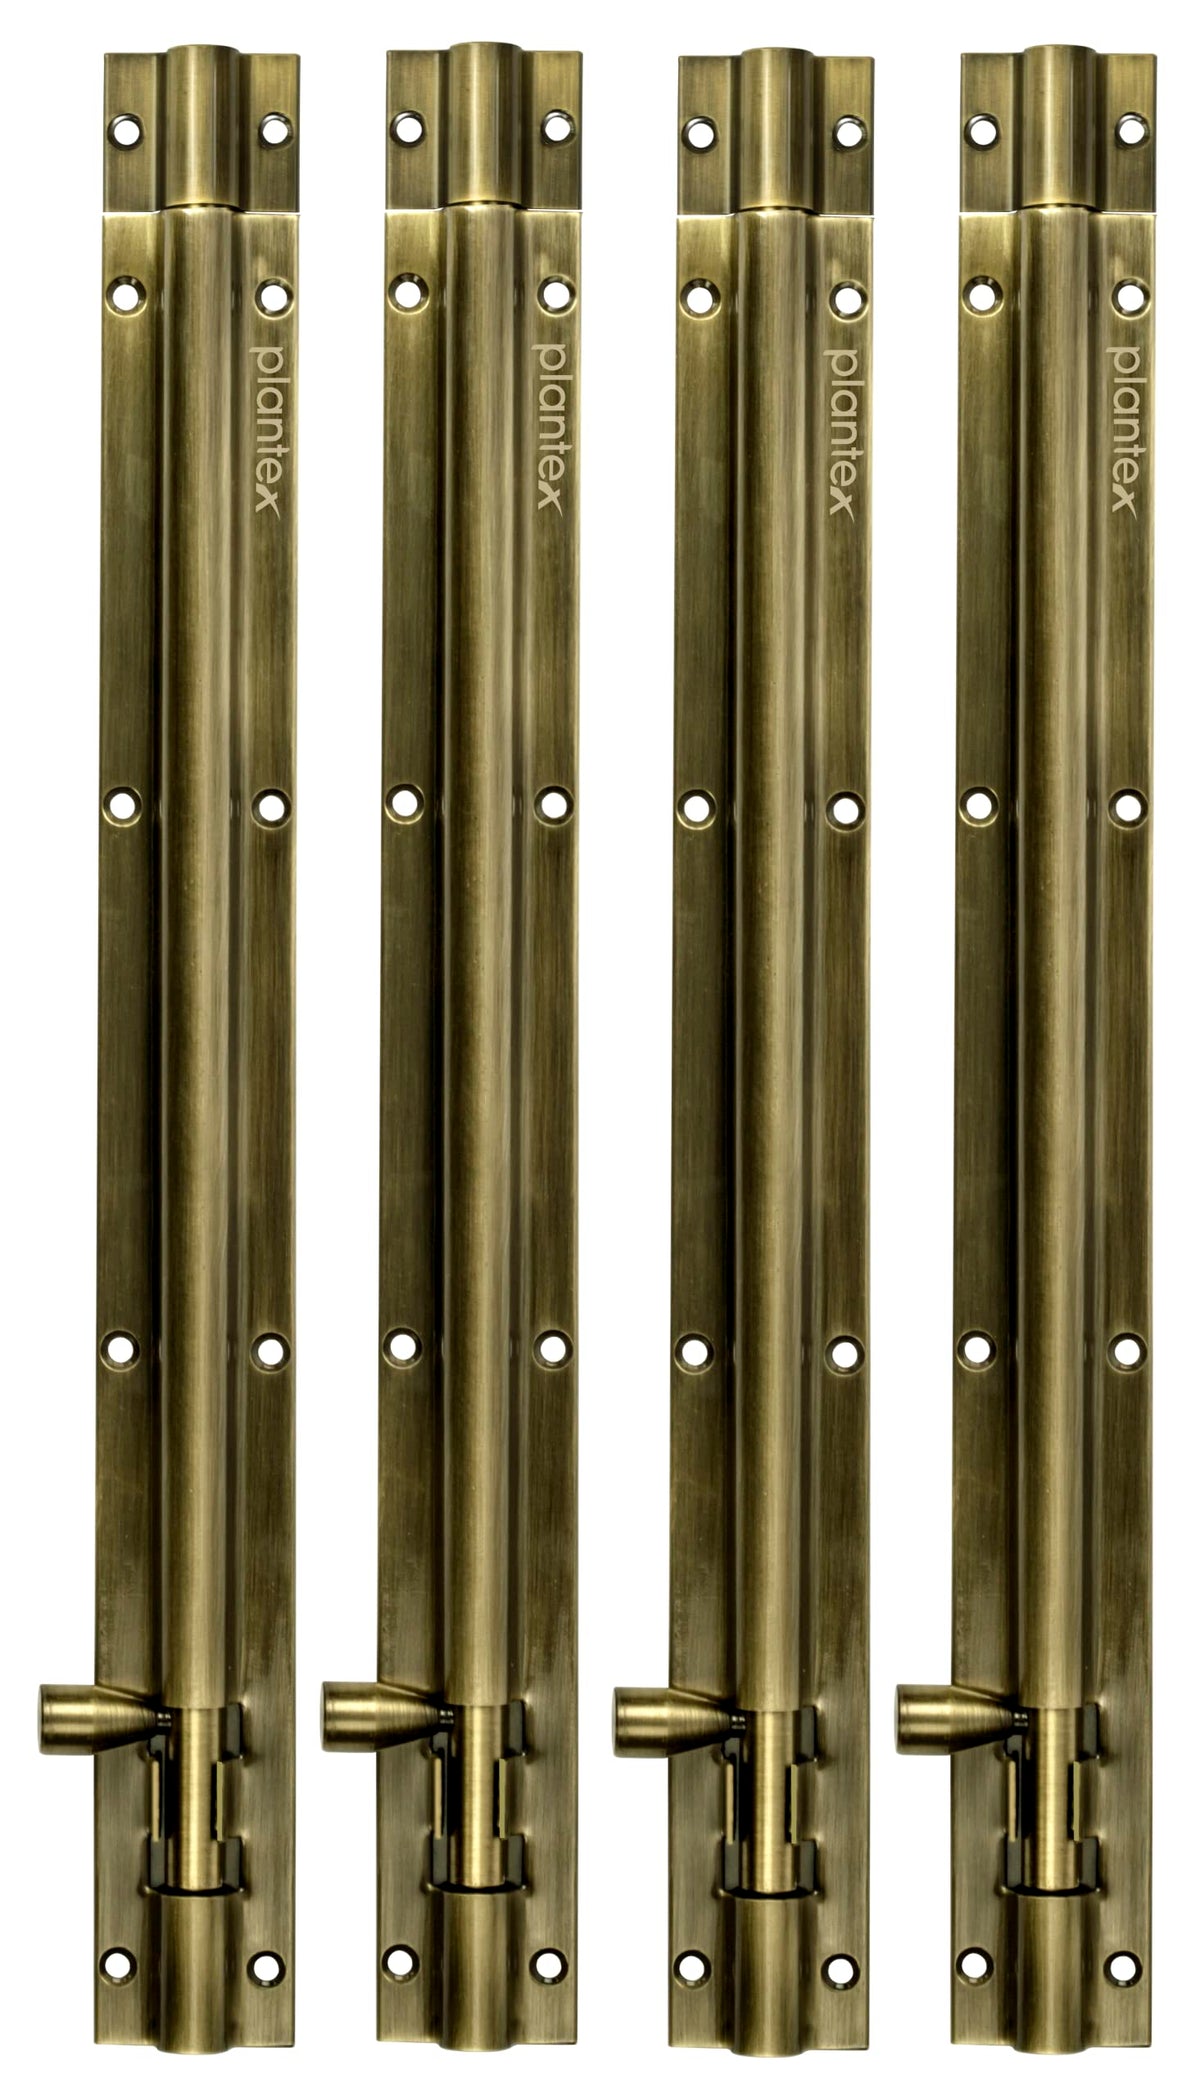 Plantex Antique Tower Bolt for Windows/Doors/Wardrobe - 12-inches (Pack of 4)